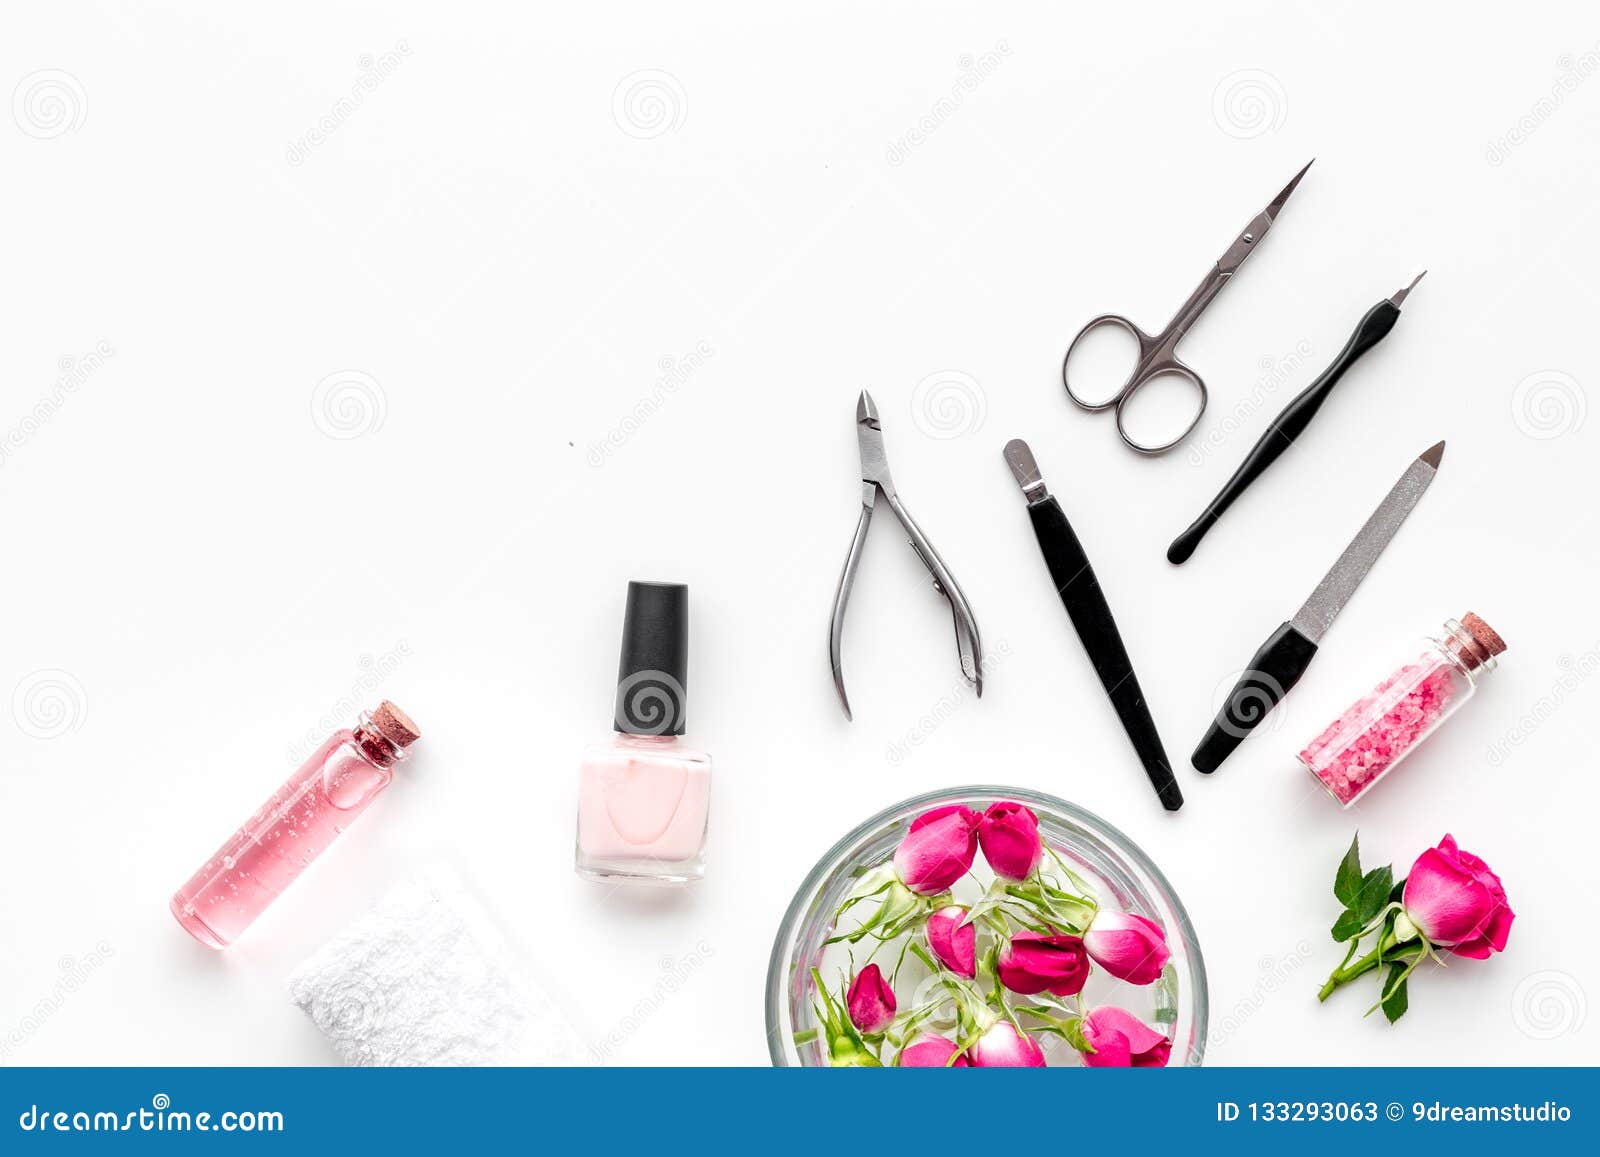 Download Manicure And Pedicure Equipment For Nail Bar Set On White Background Top View Mockup Stock Image Image Of Rose Battle 133293063